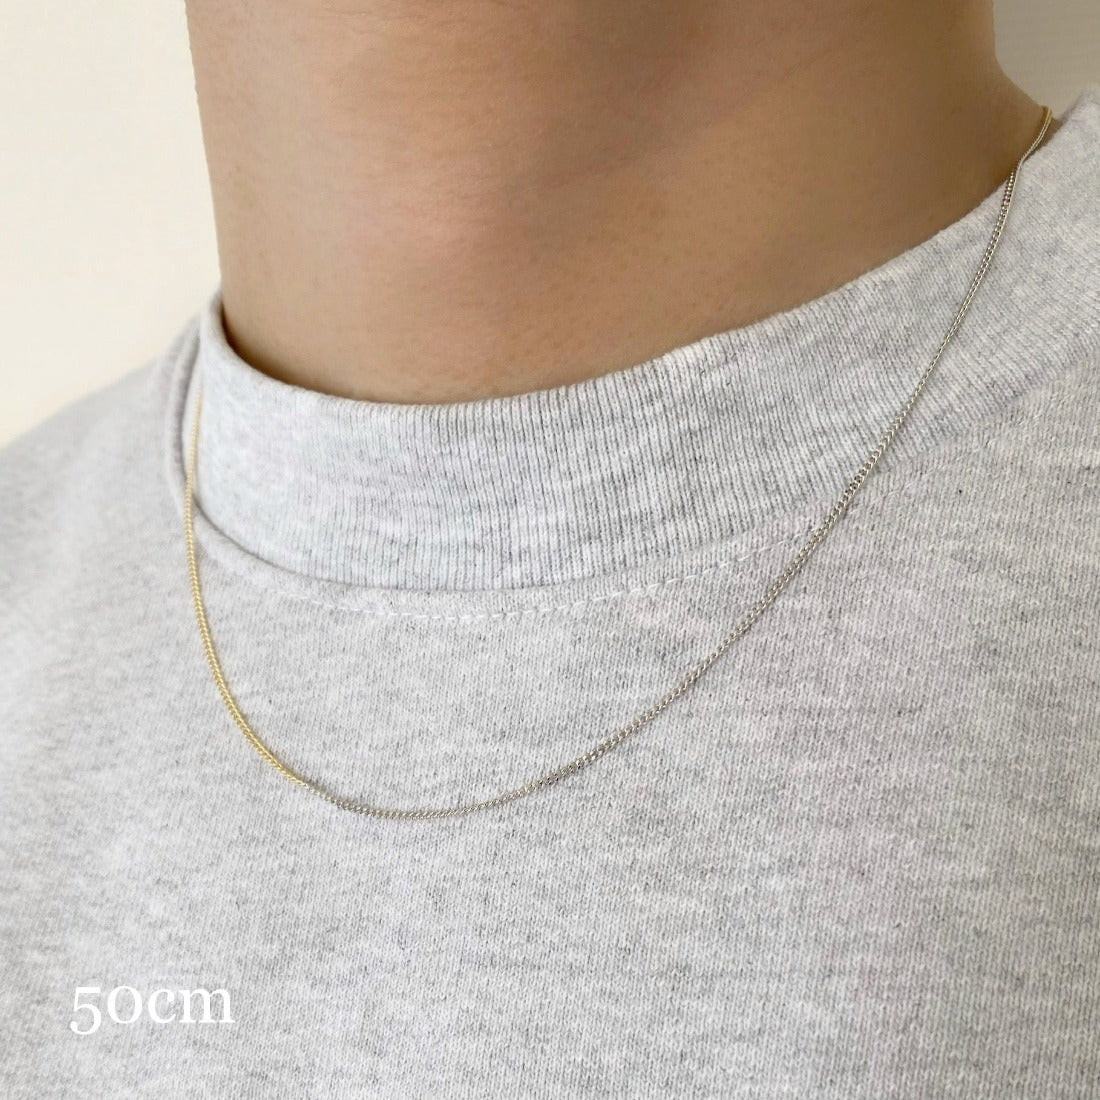 18K　コンビネーション　Combination　ネックレス　Necklace　Chain Necklace　チェーンネックレス　着用